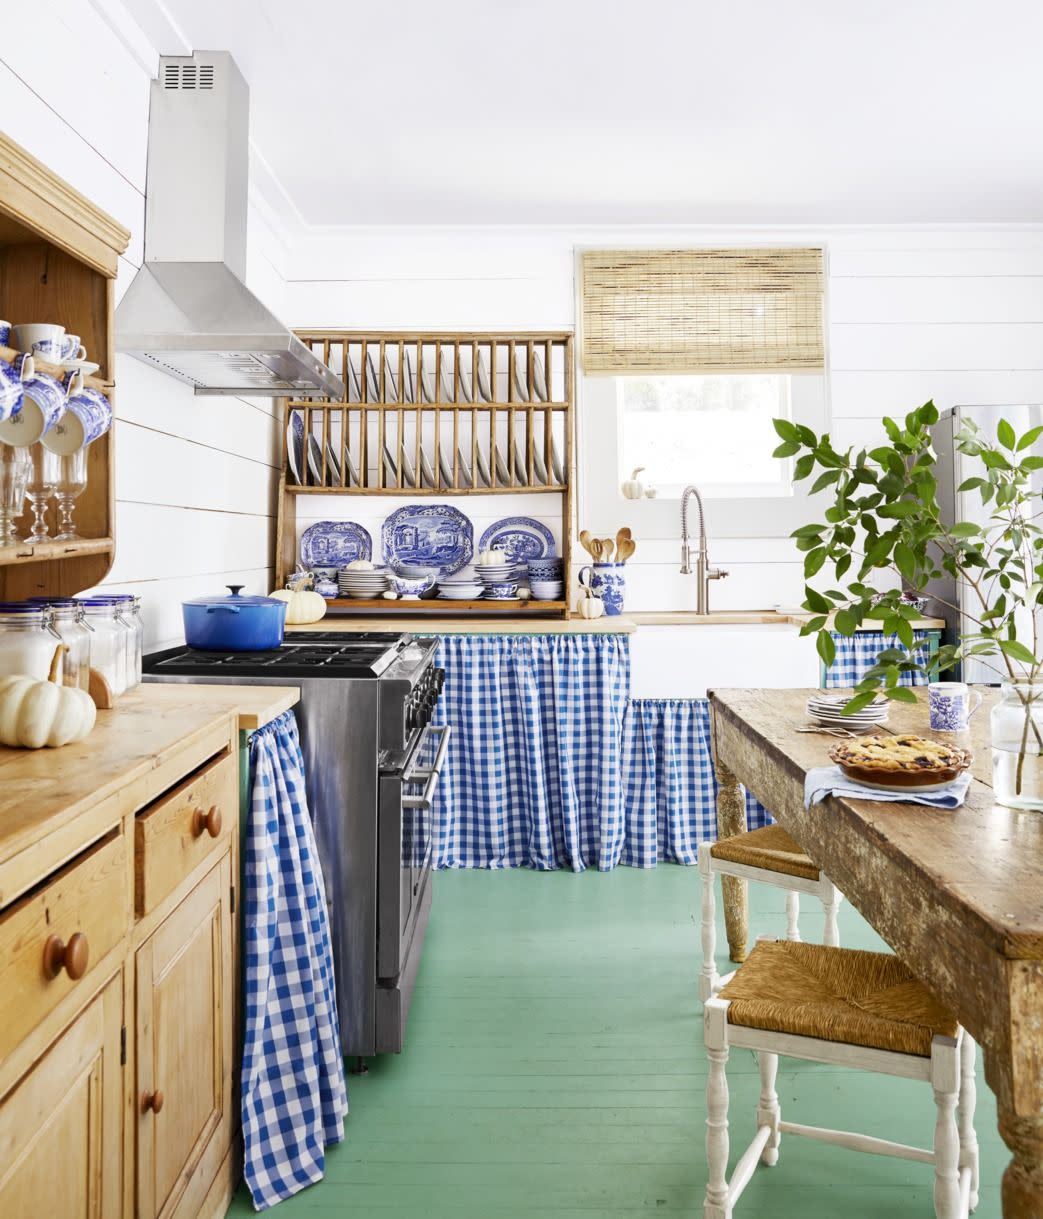 kitchen with green painted floor and gingham skirts around the cabinetry